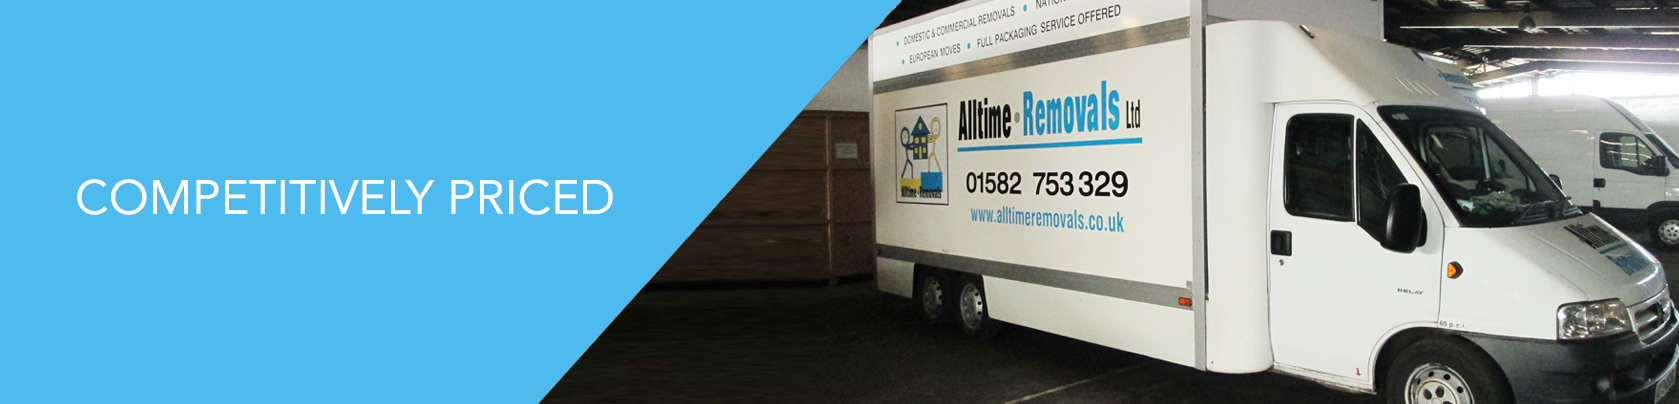 Competitively Priced Removals